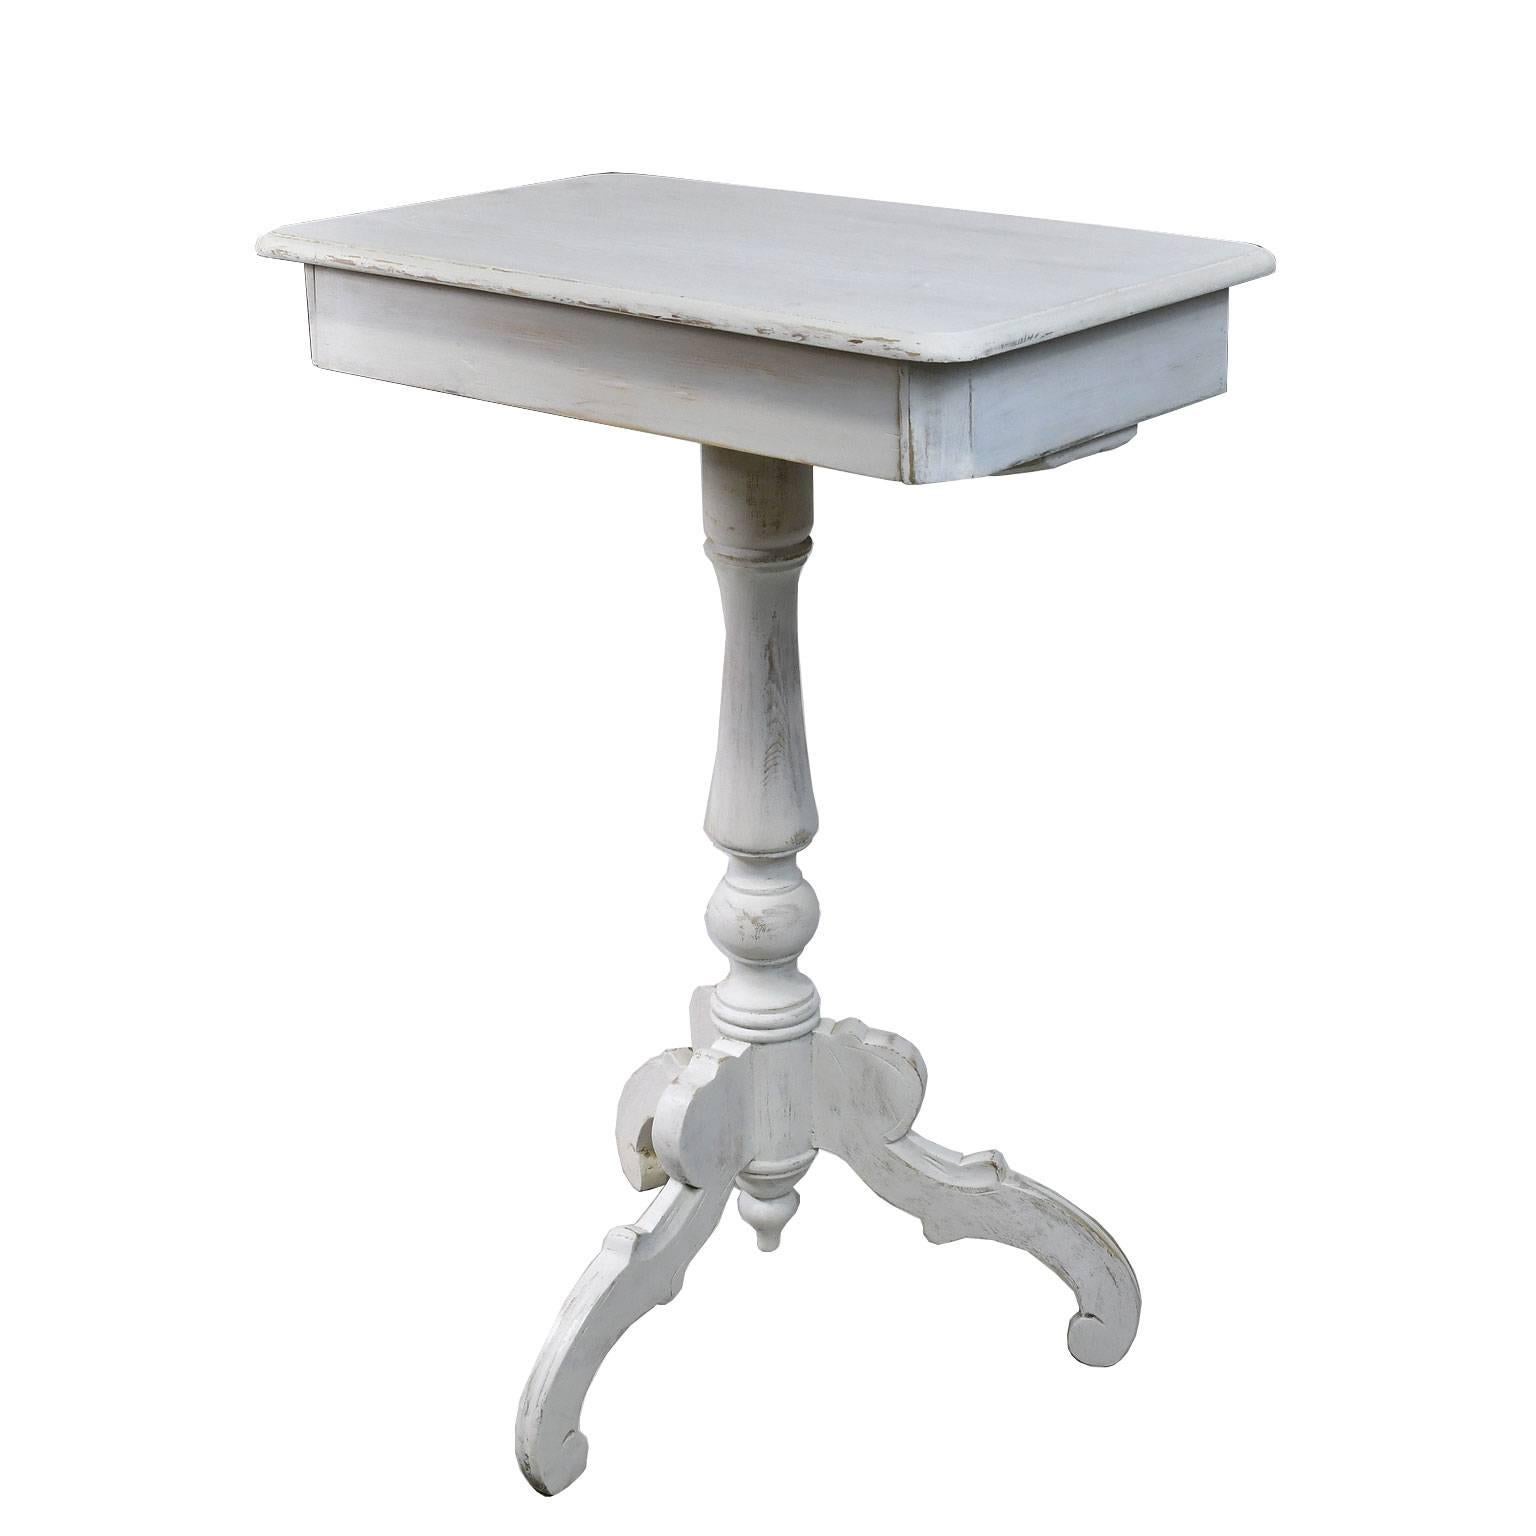 Hand-Painted Swedish Gustavian End Table on Tri-foot Pedestal w/ Grey/White Paint, c. 1825 For Sale